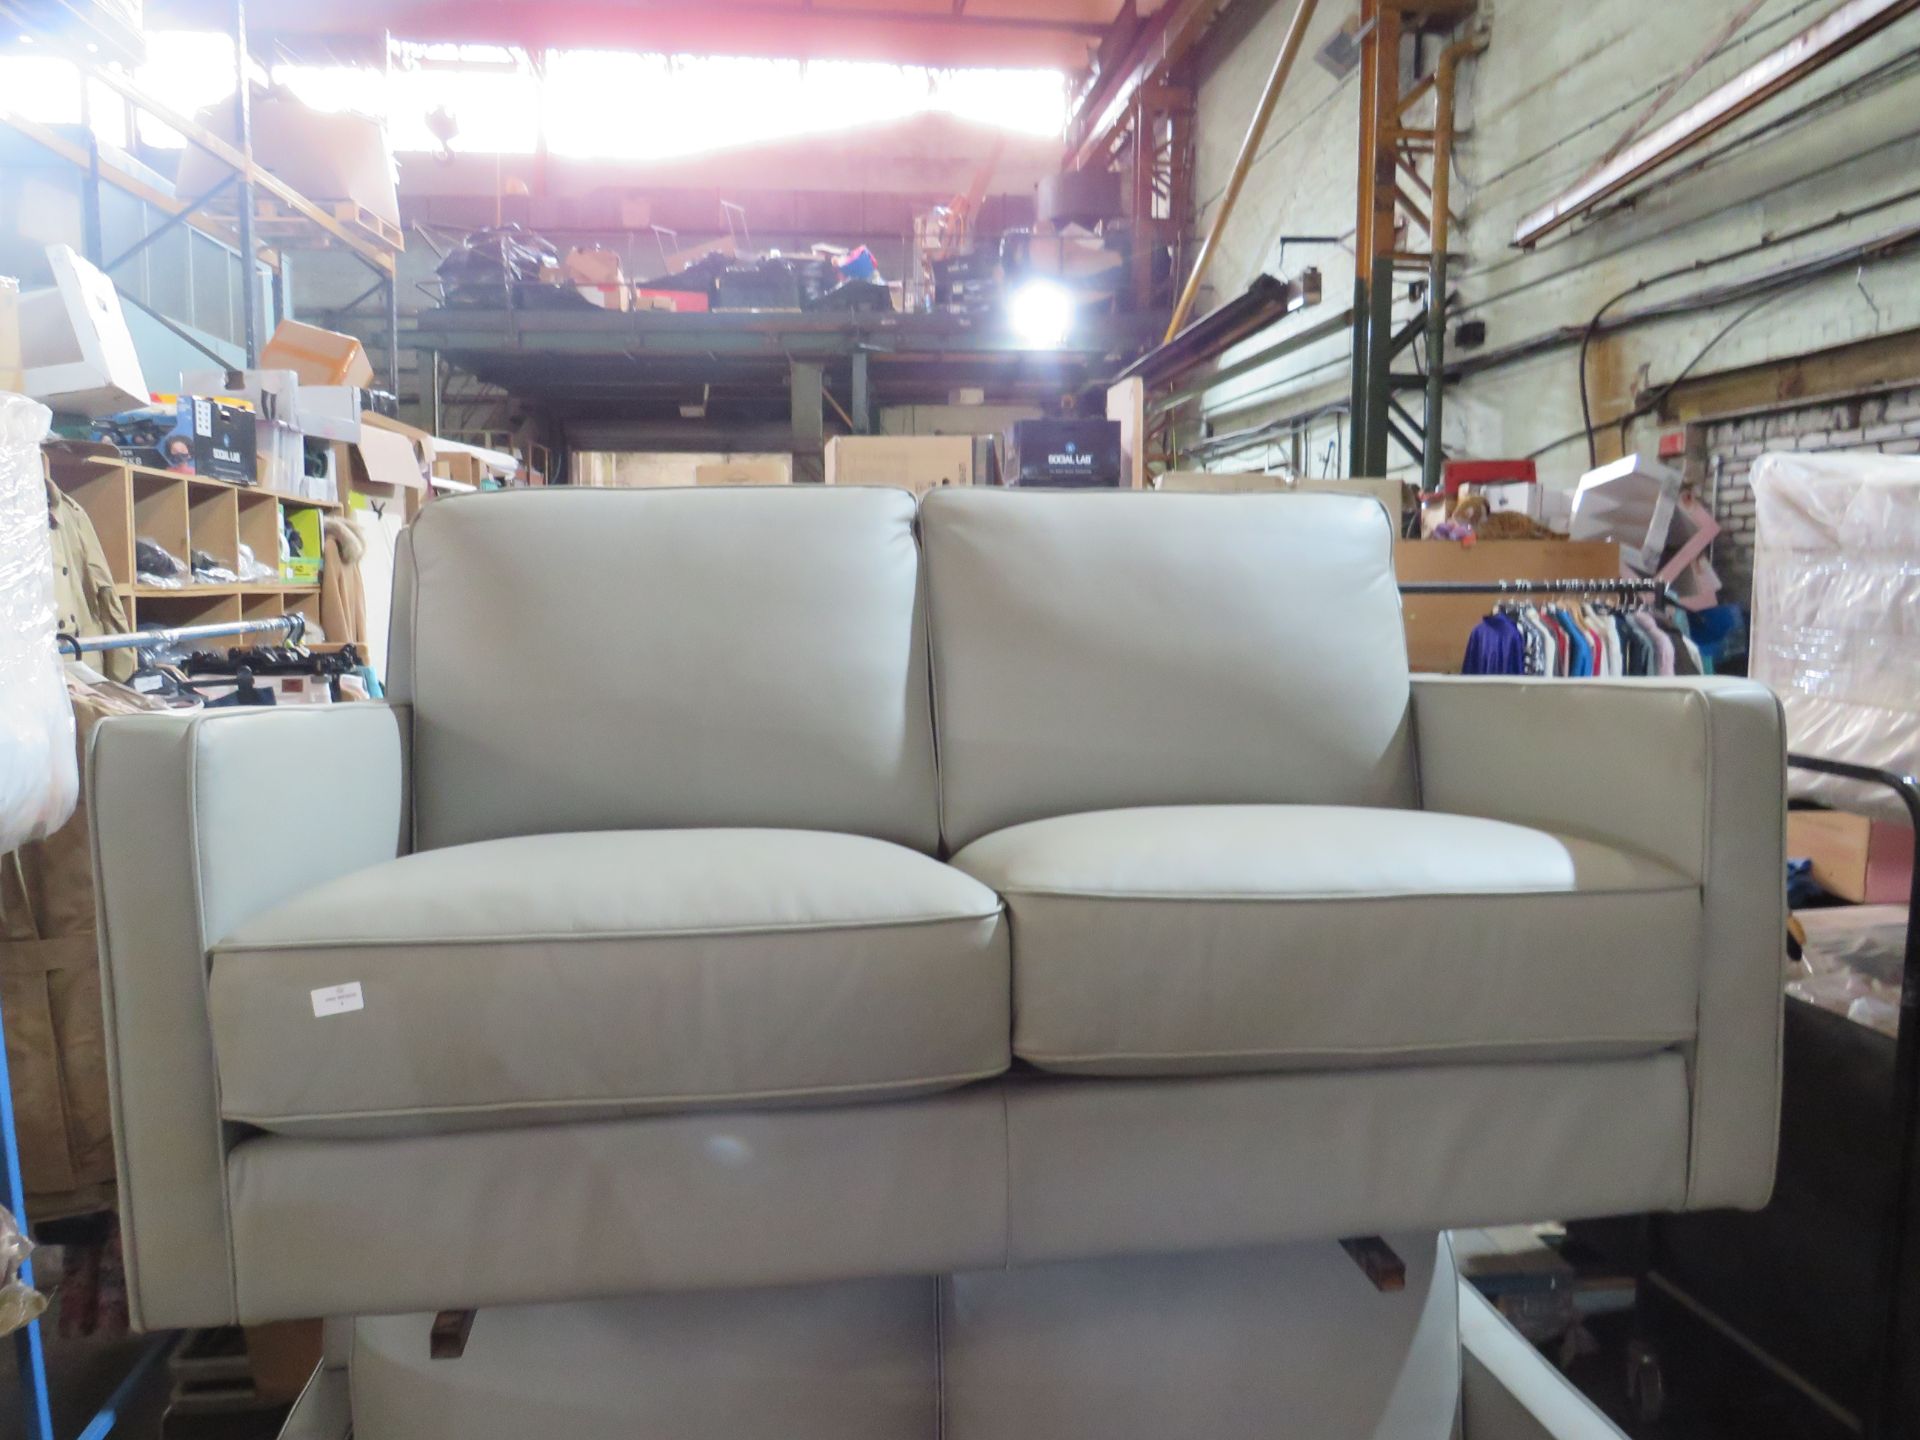 Costco Soft Italian Leather Grey 2 Seater Sofa, in good condition may have a few small scuffs in